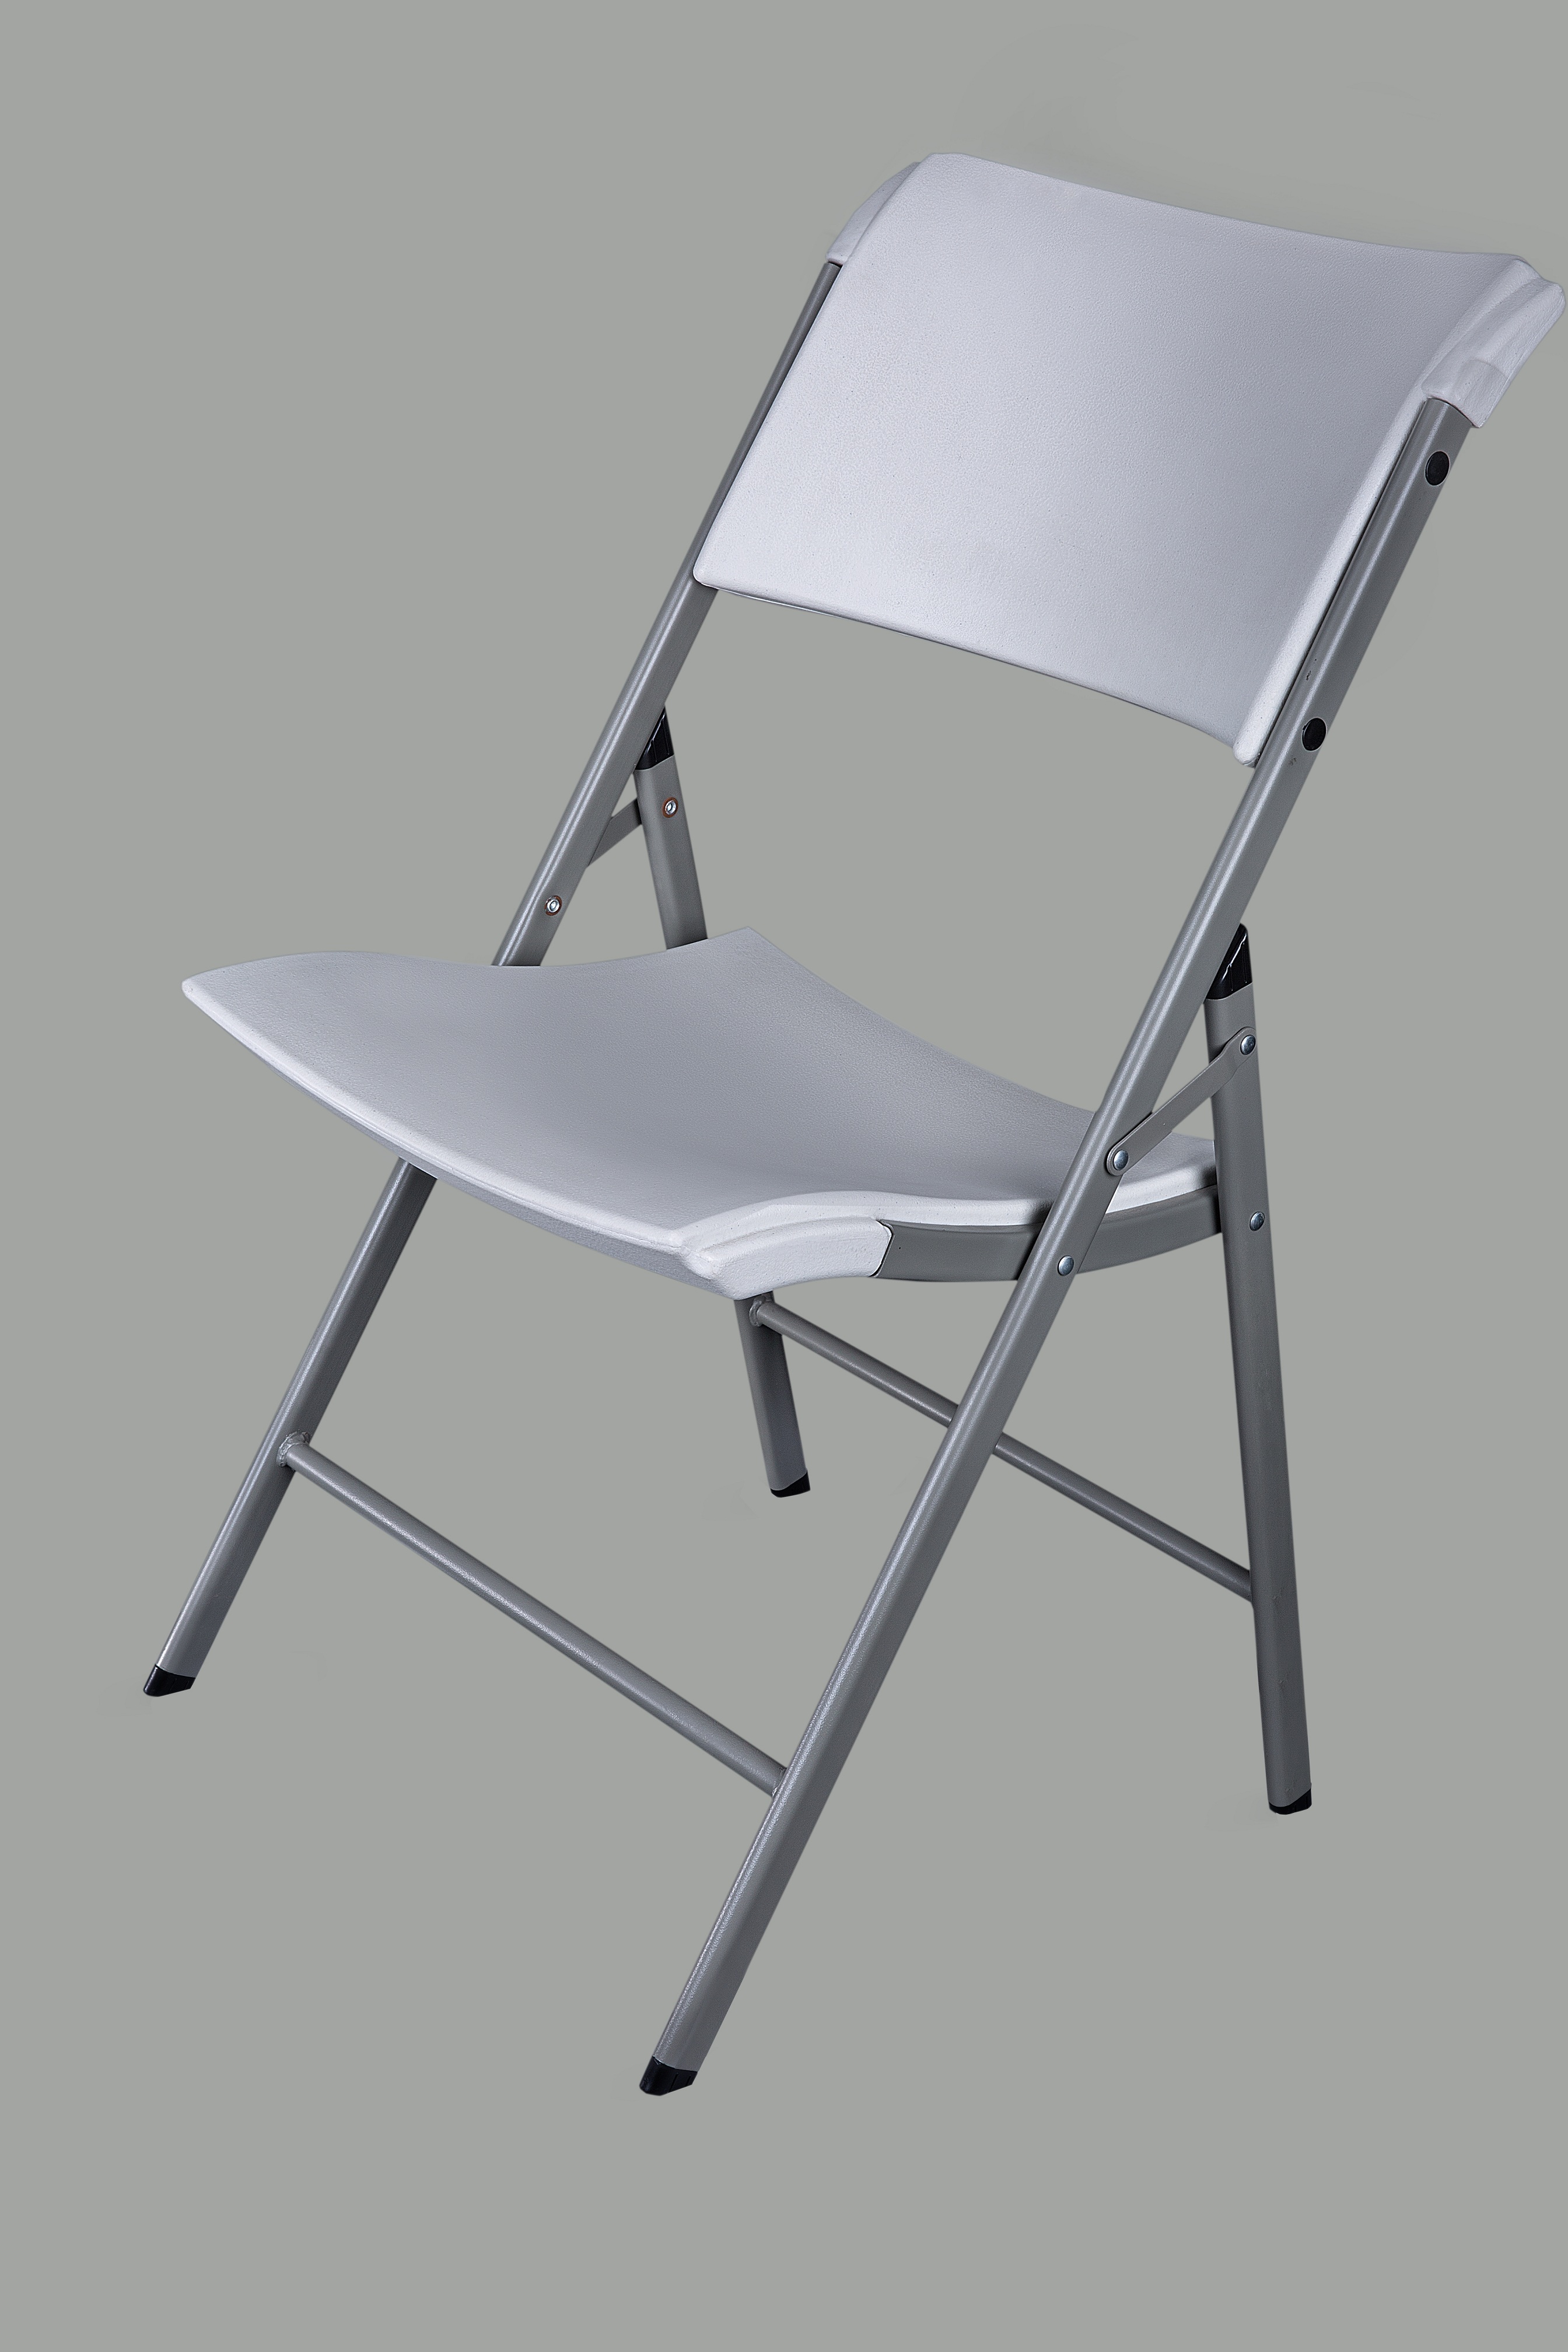 Party Foldable Folding Chair